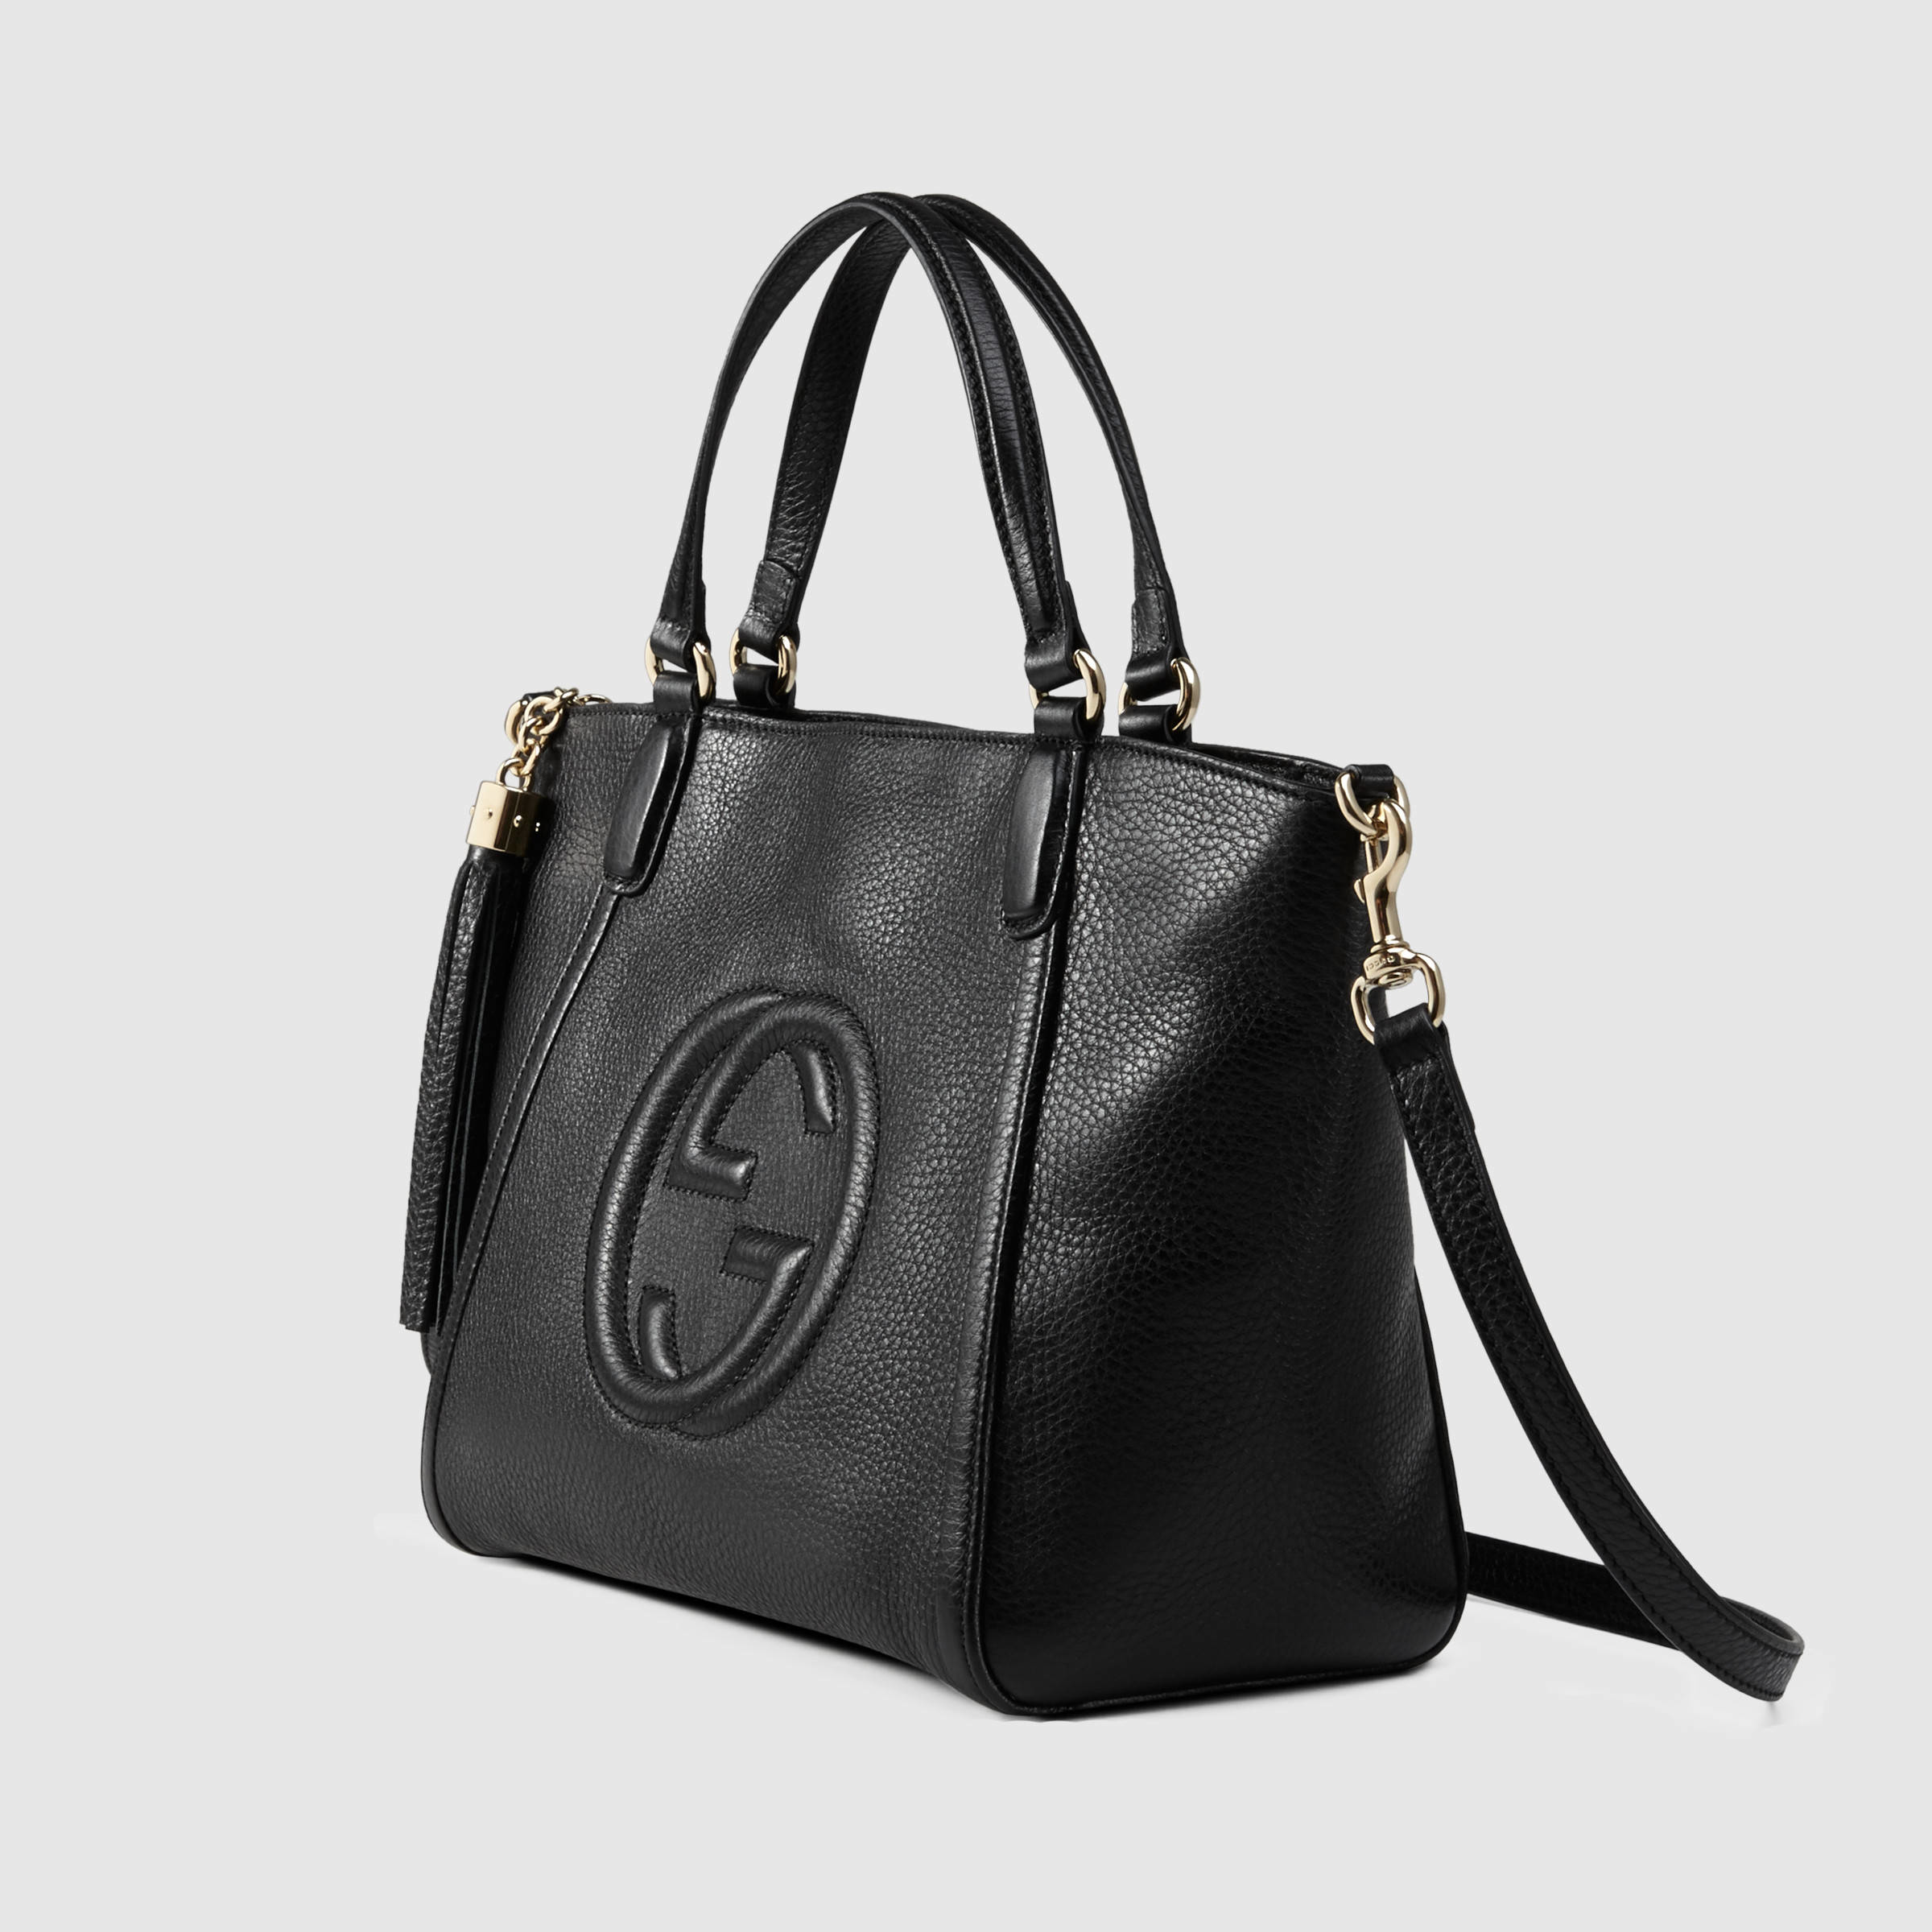 Lyst - Gucci Soho Leather Top Handle Bag in Black